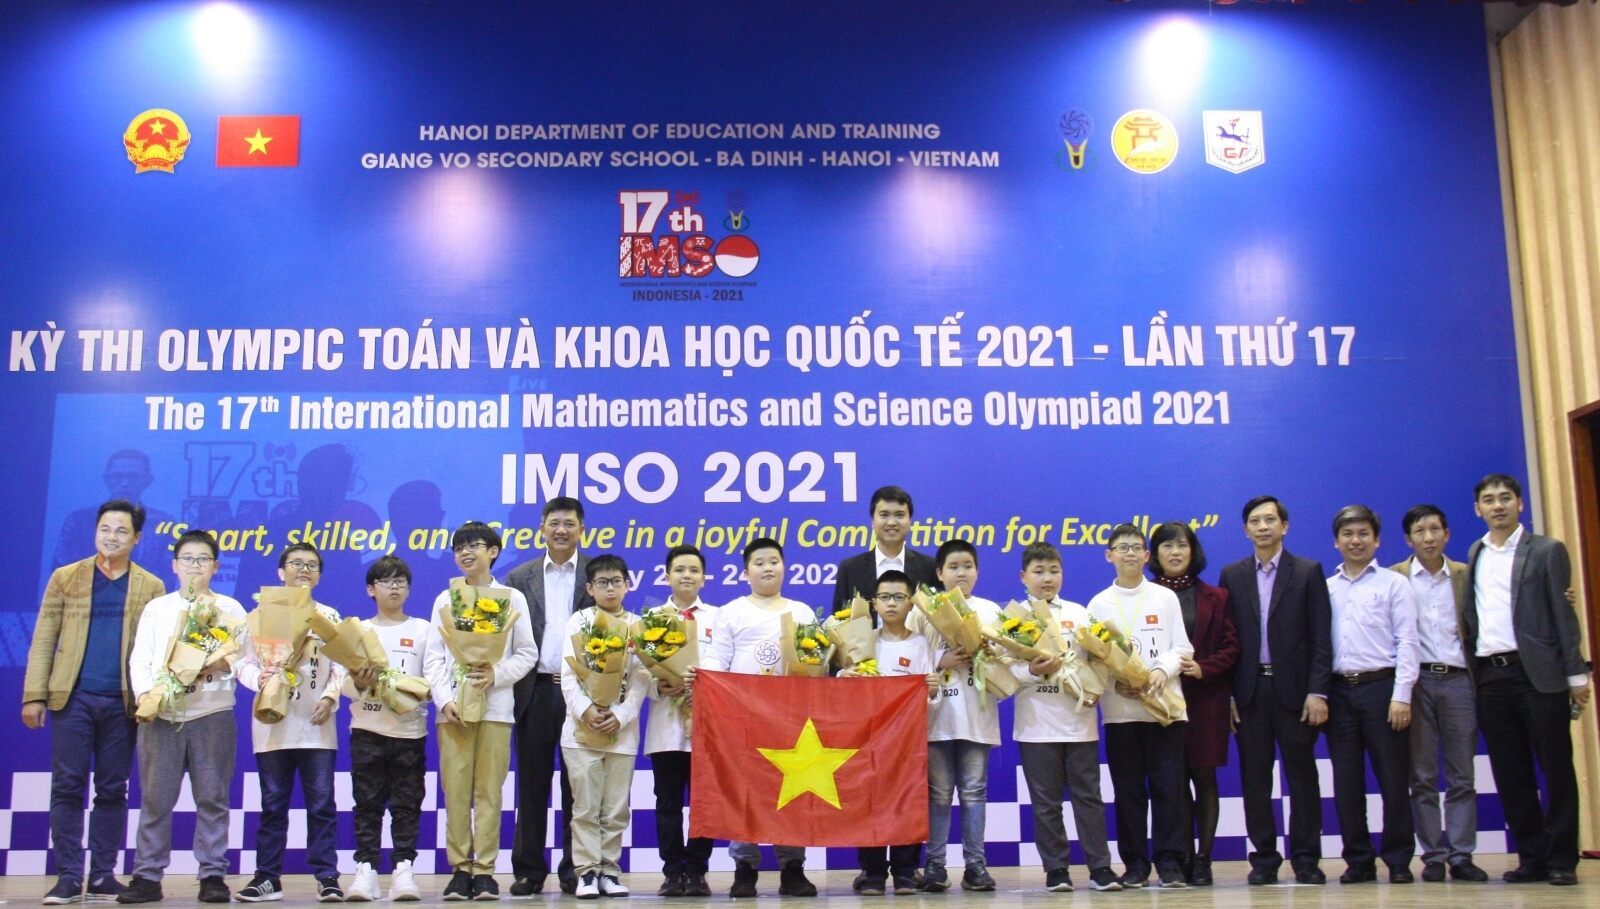 Students busily prepare for up to 30 international math competitions